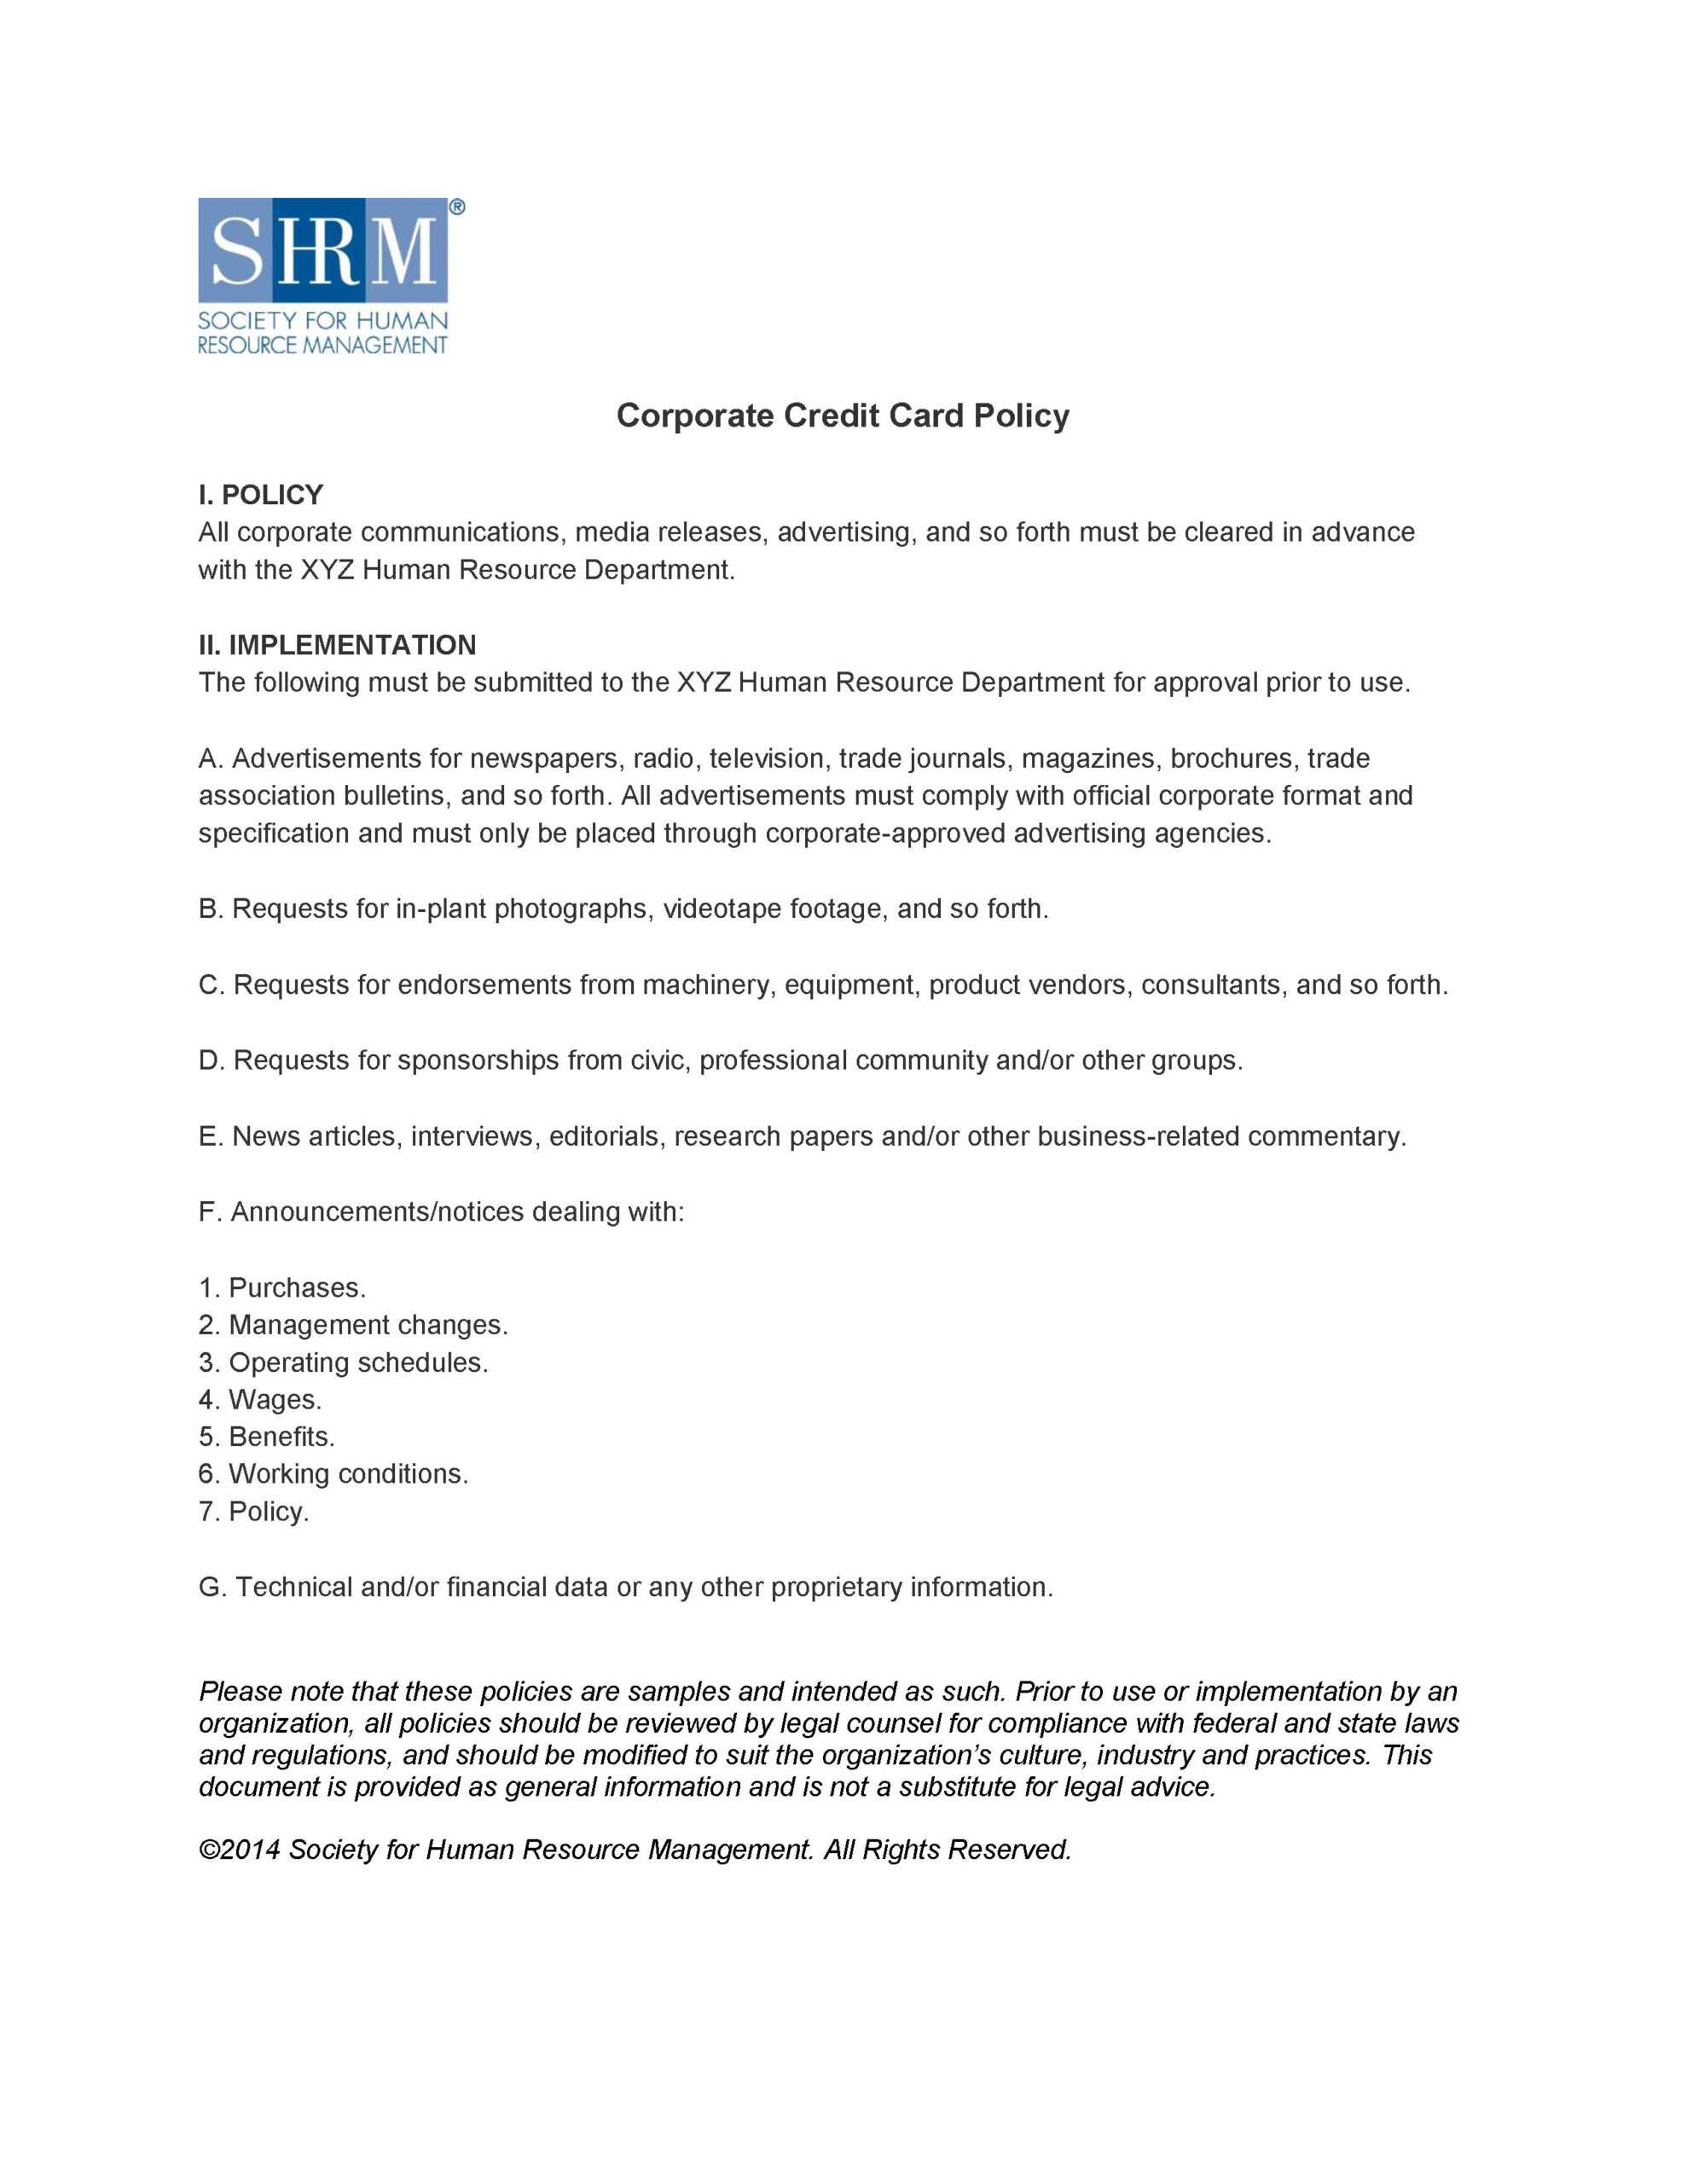 Corporate Credit Card Policy | Alexander Street, A Proquest With Regard To Company Credit Card Policy Template